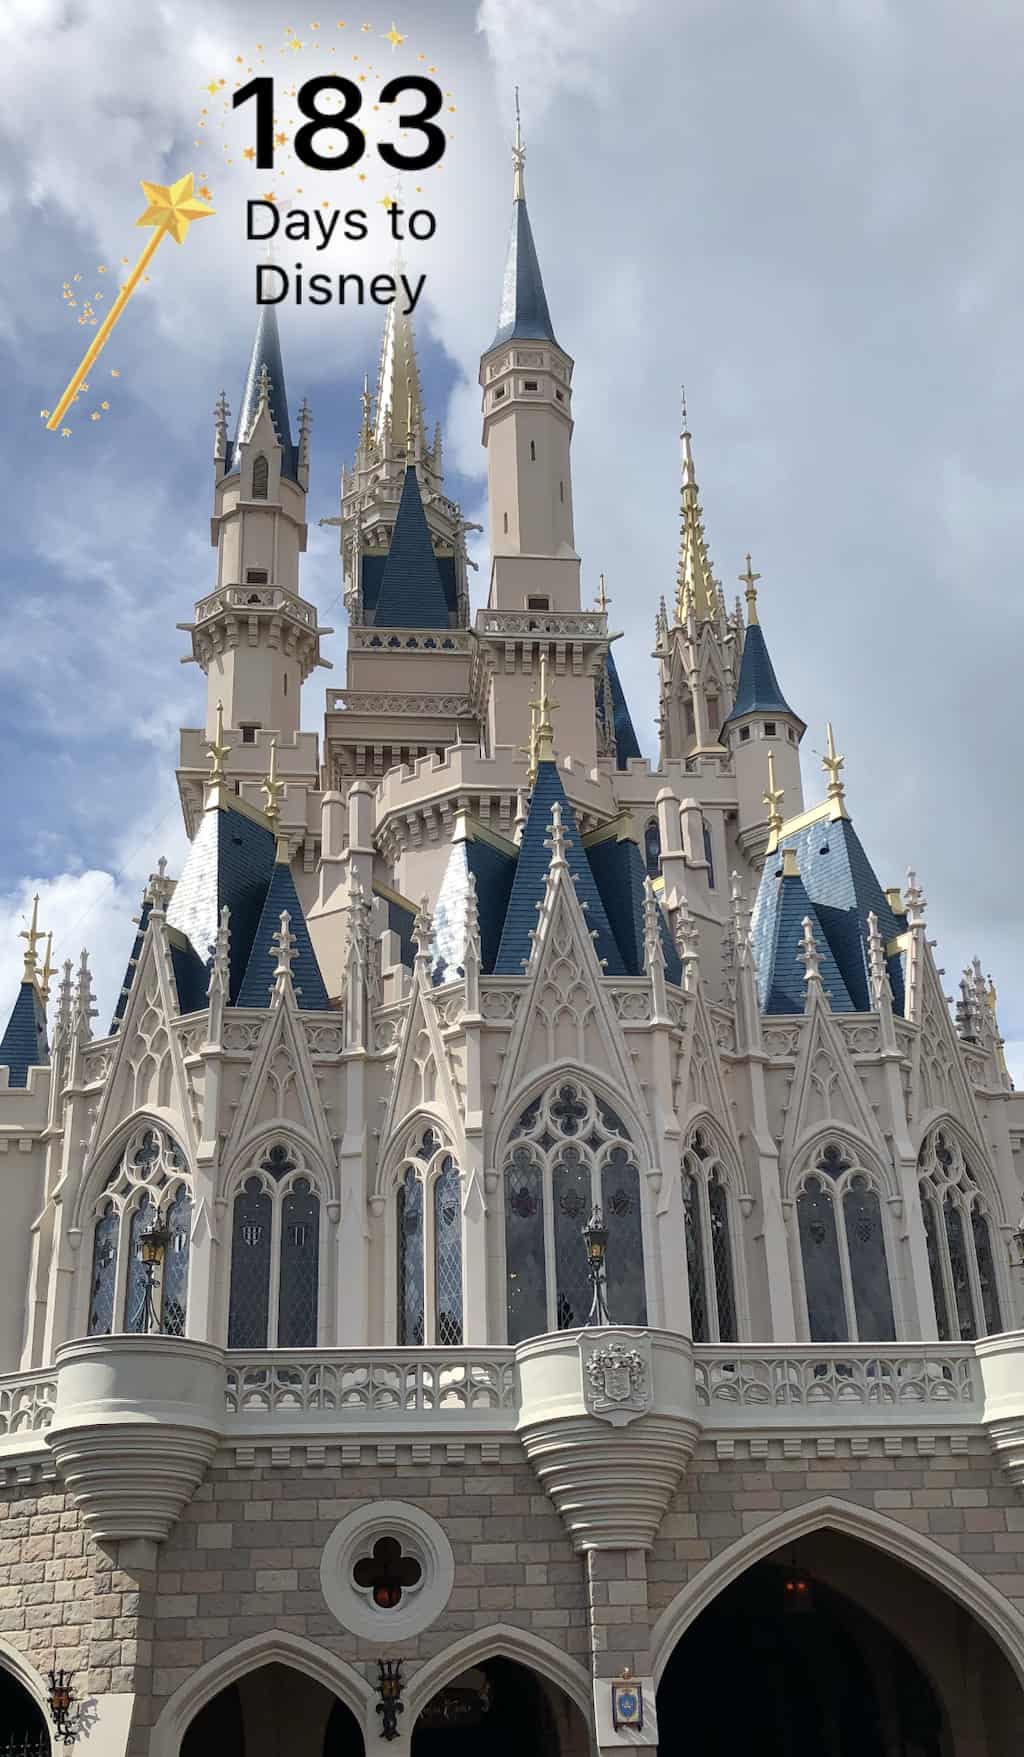 These are some fun ways to prepare kids for a Disney World trip that will make them more equipped and take some of the potential burden off your shoulders.